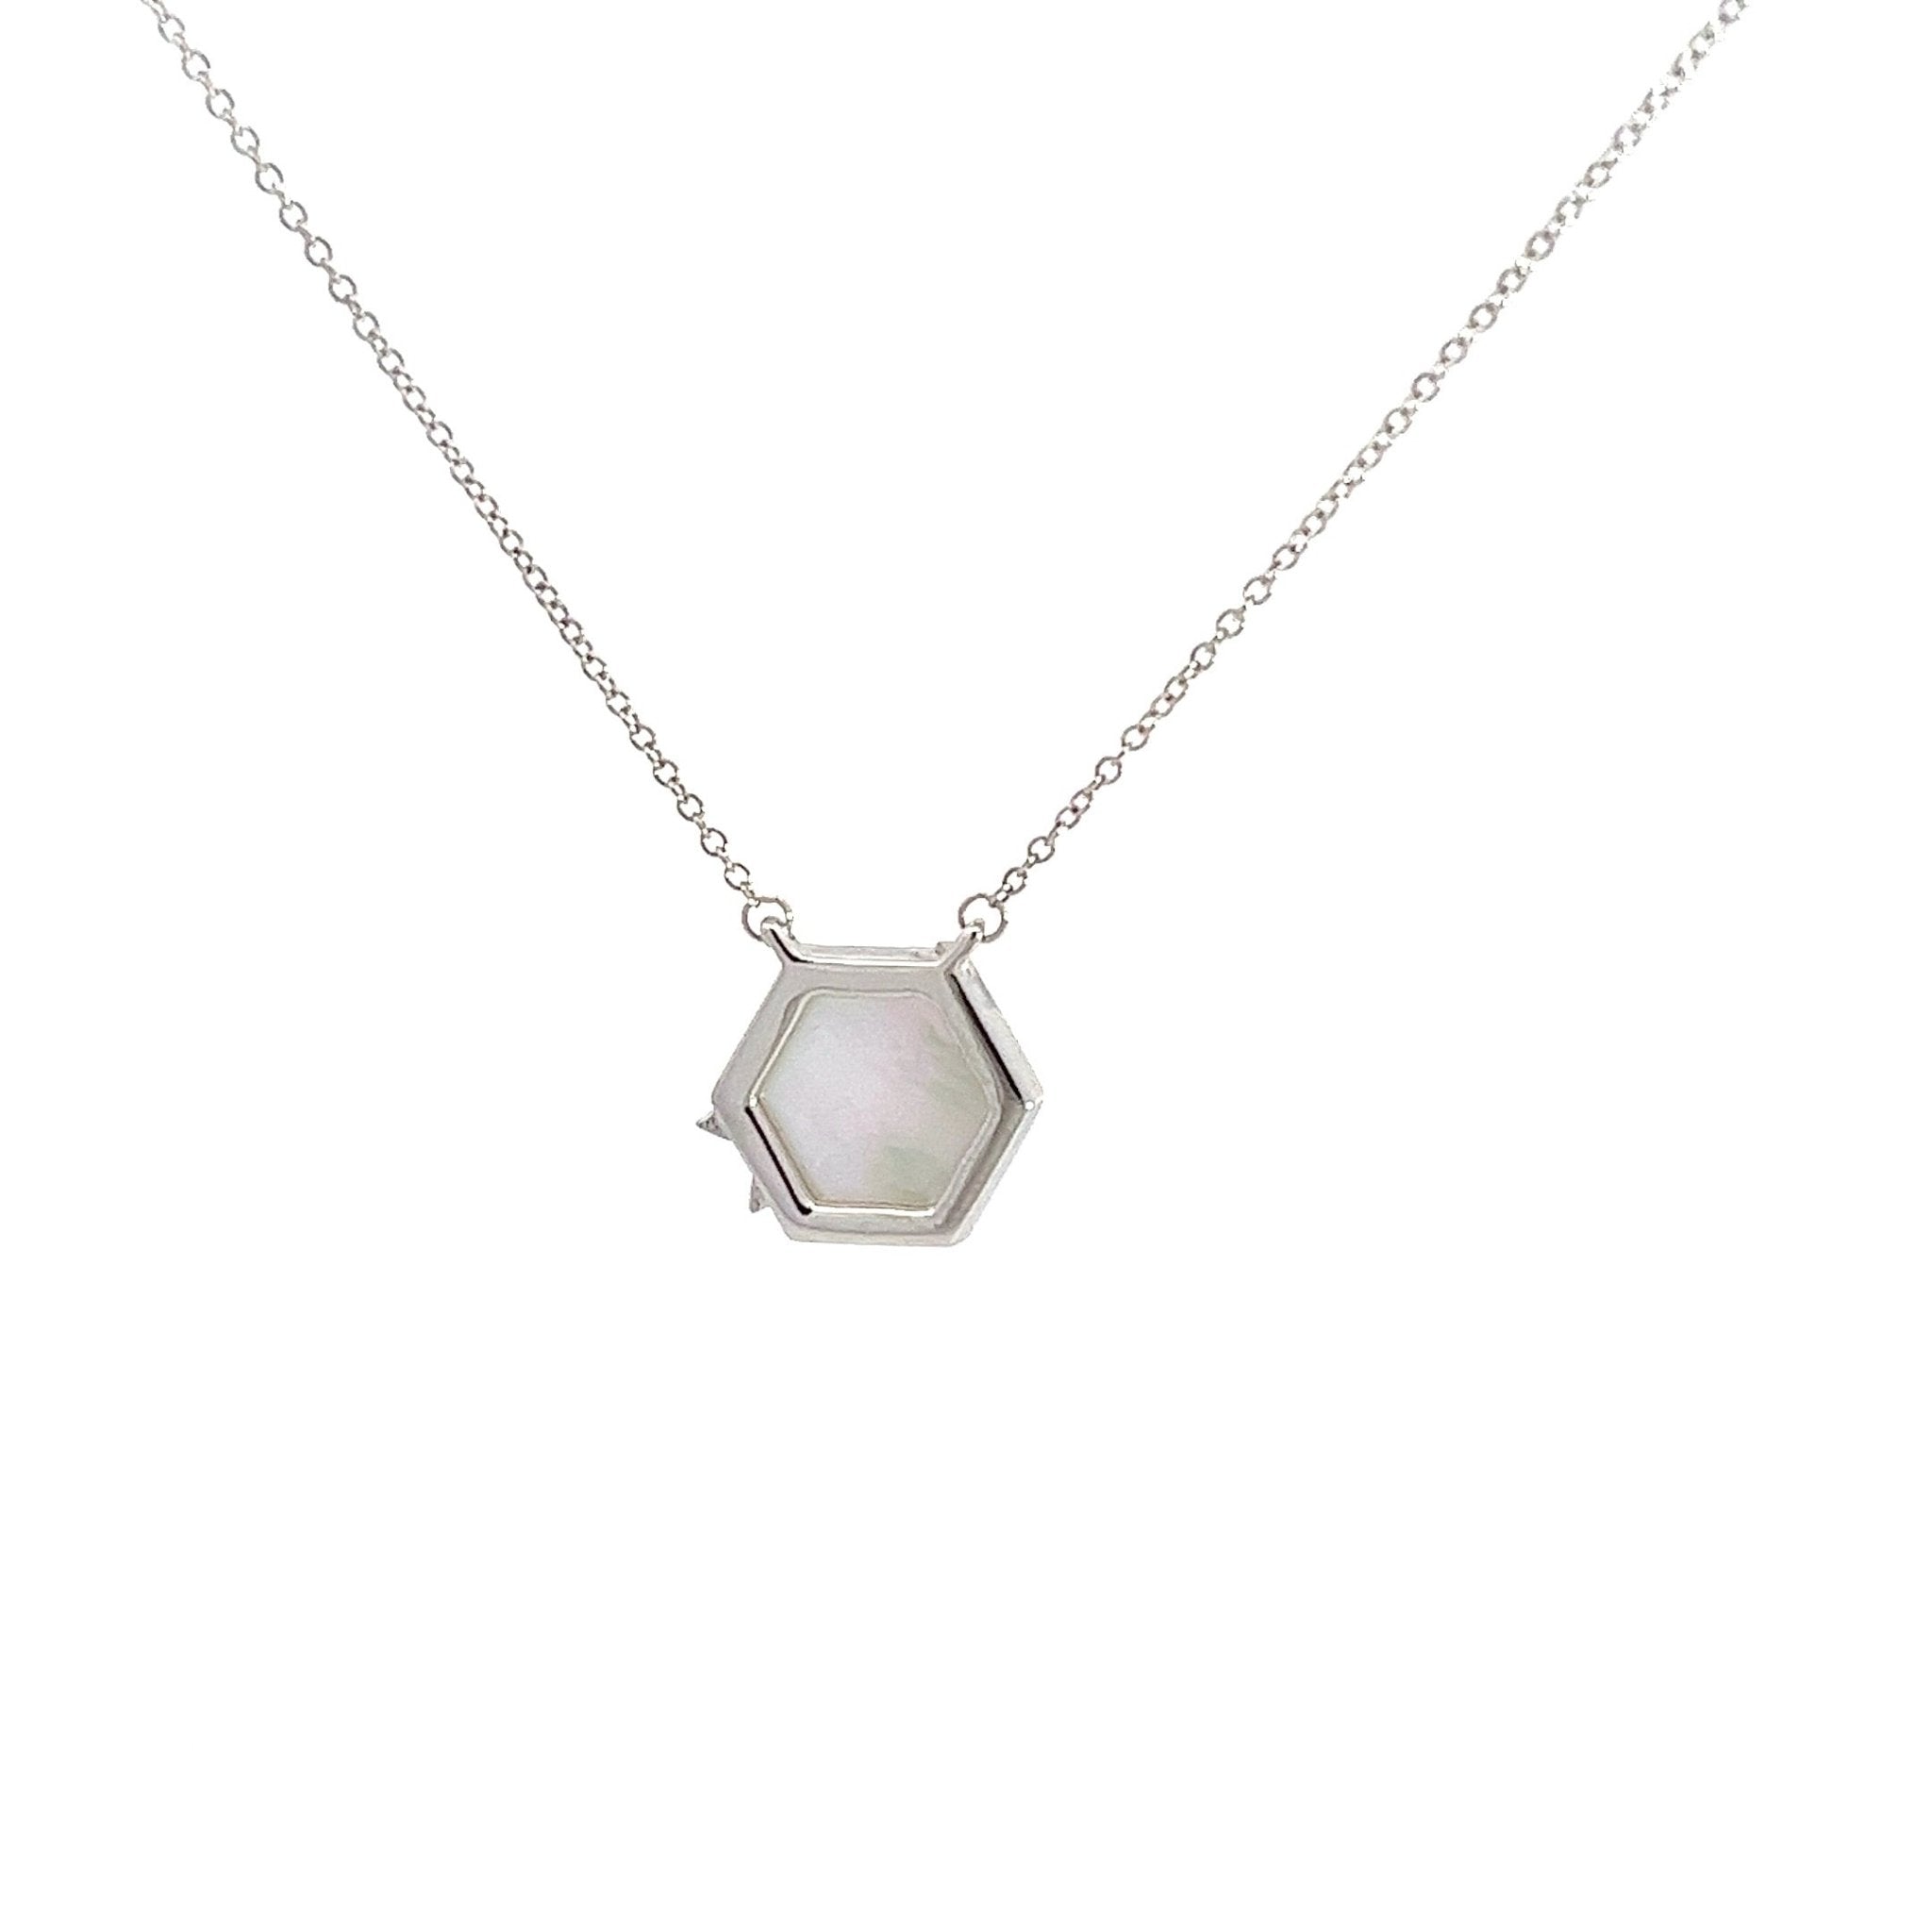 Eternelle Necklace Mother of Pearl Diamond White Gold by Natkina